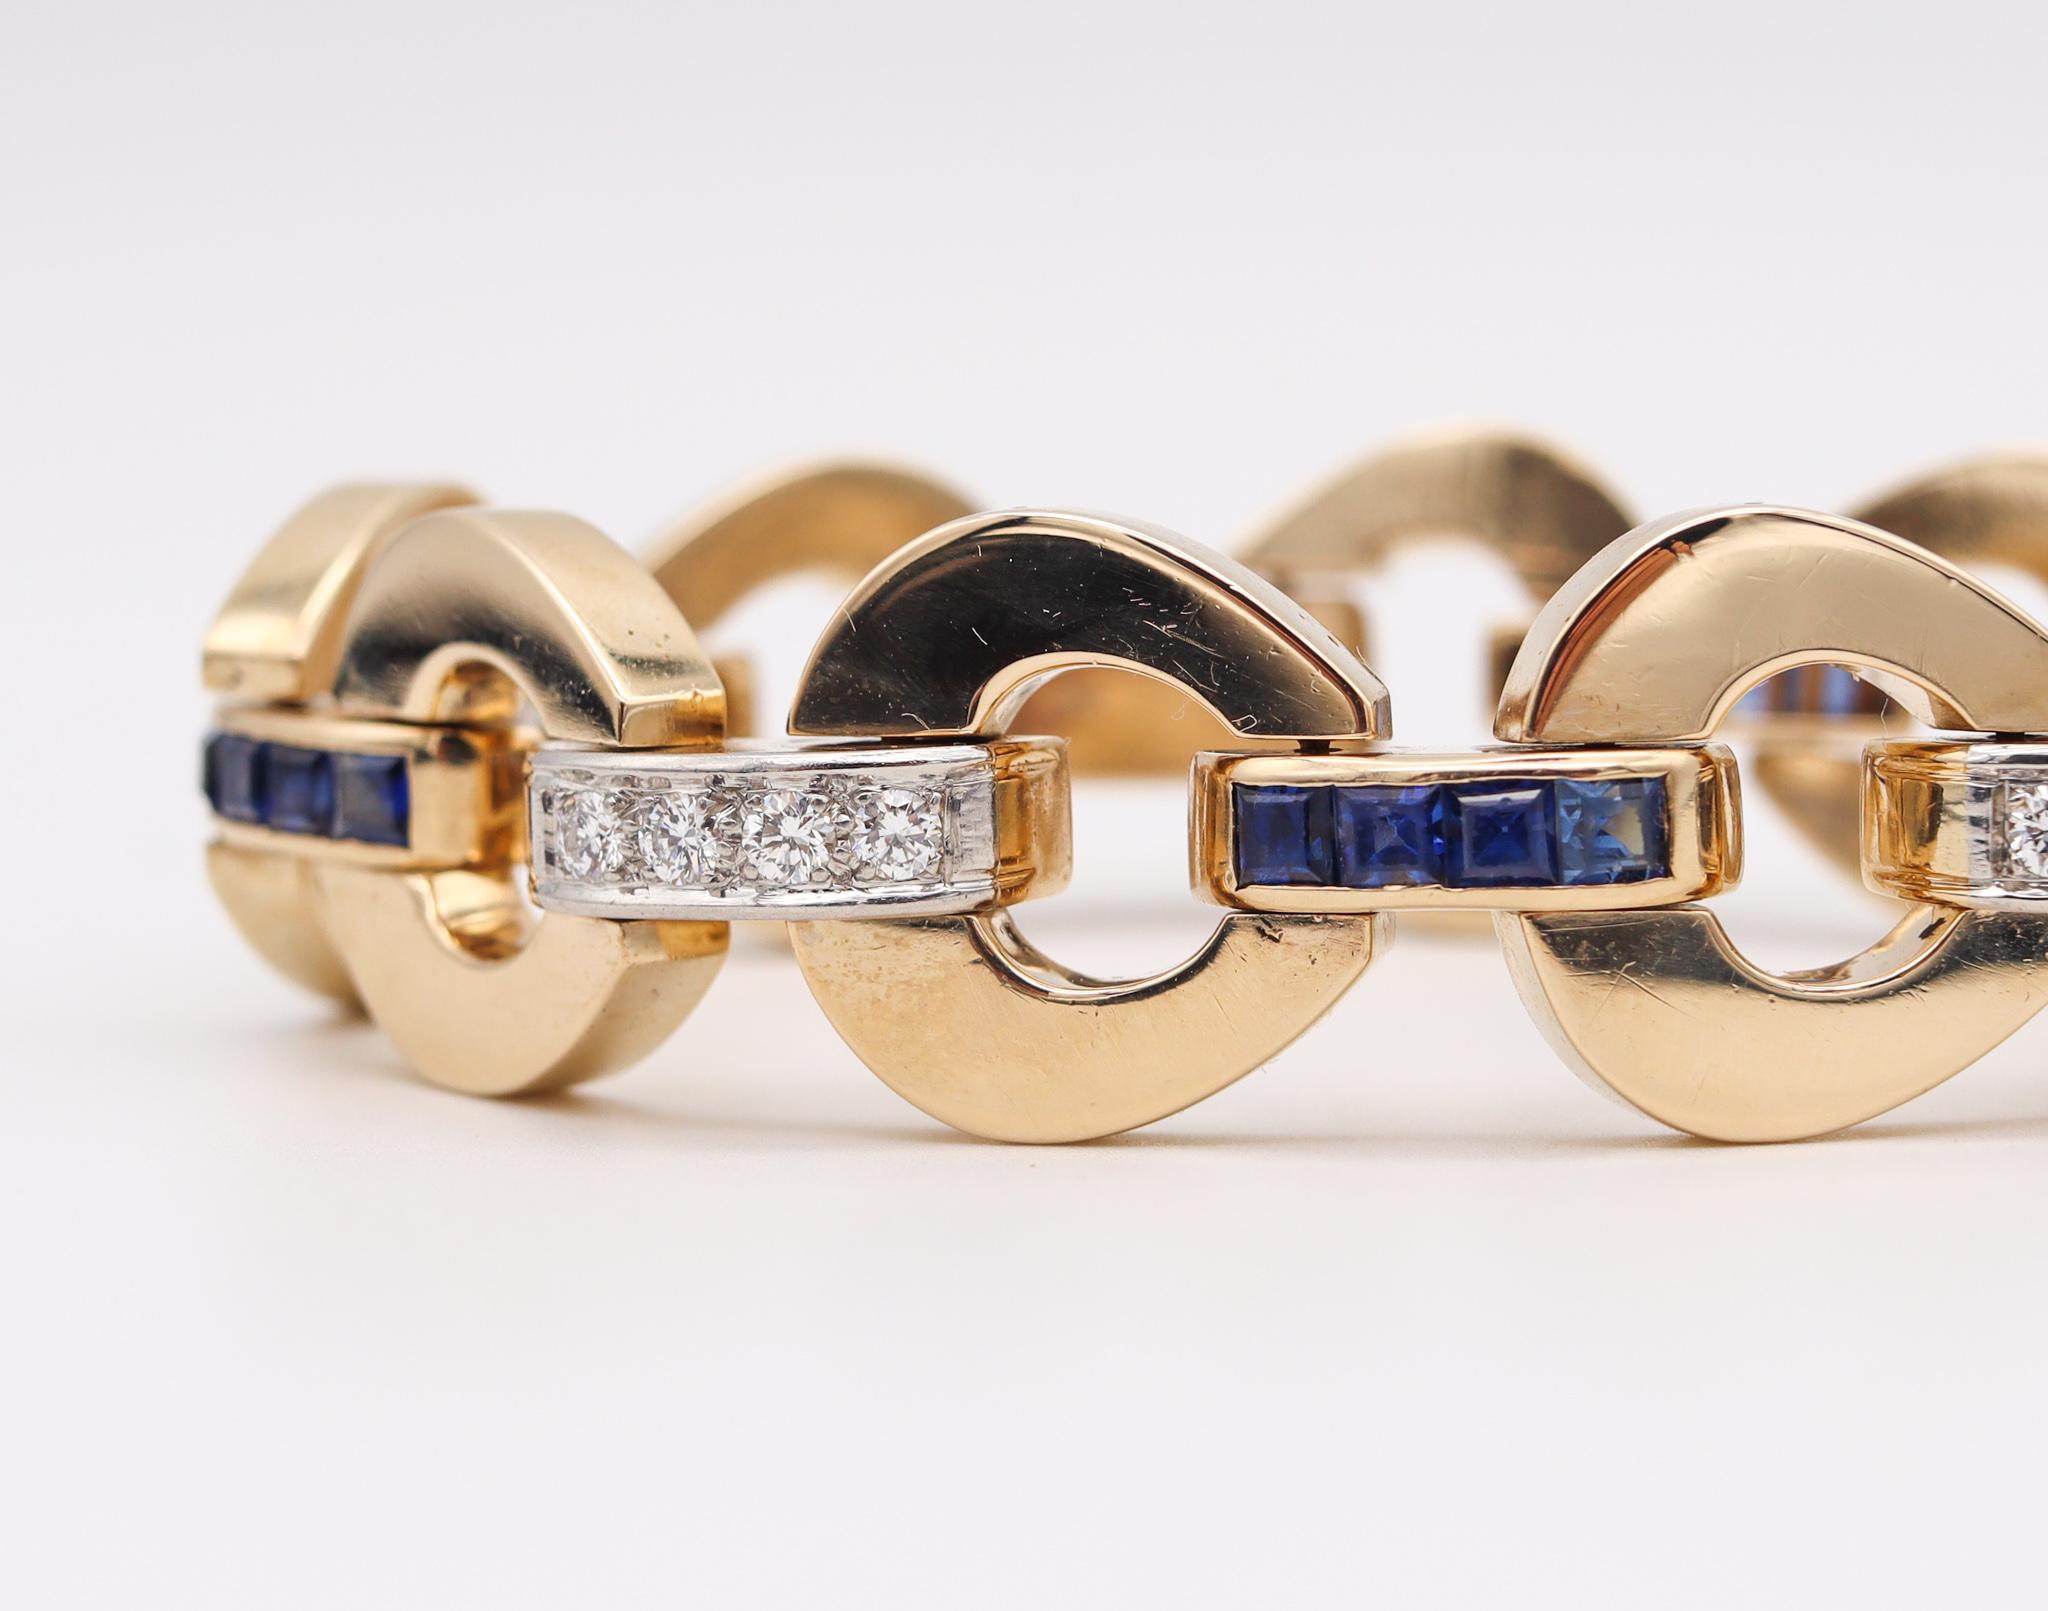 Retro modernist bracelet with gemstones.

Beautiful, bold and substantial bracelet crafted during the late mid century period back in the 1960. This piece has been made in solid yellow gold of 14 karats with high polished finish and is accented with